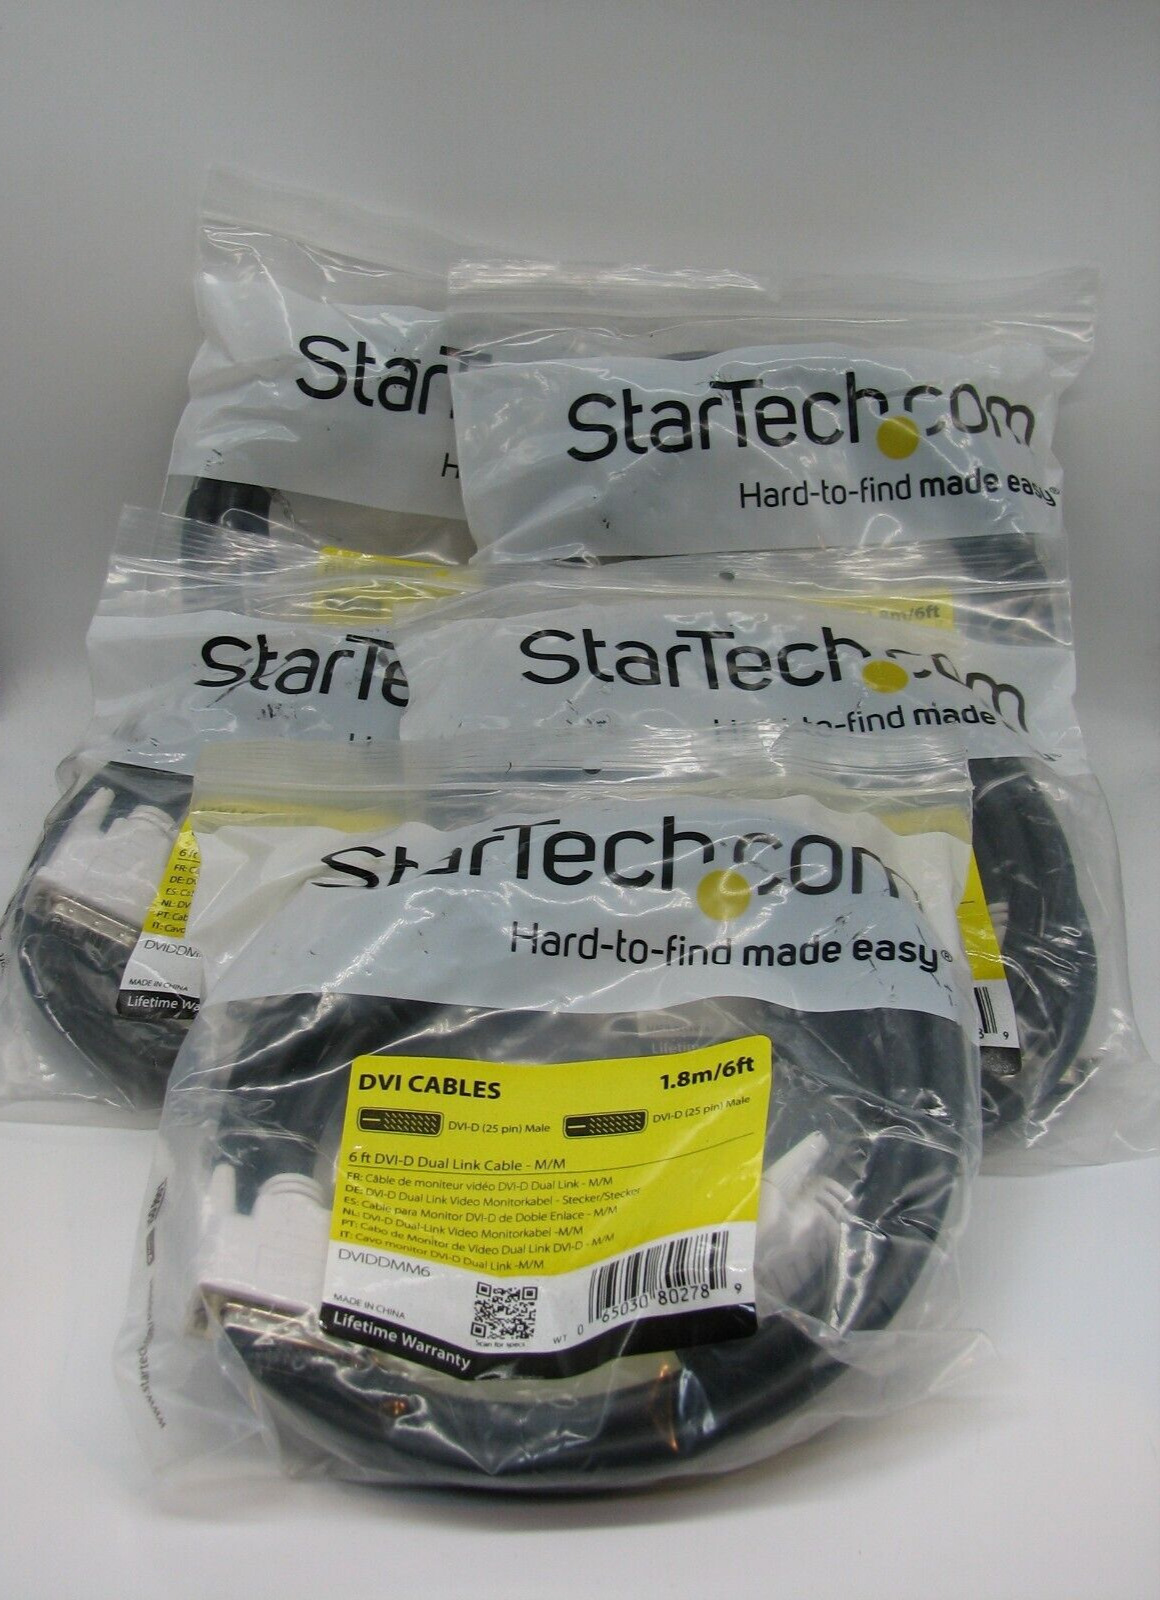 Lot 5 New StarTech DVIDDMM6 DVI-D Dual Link Cable- M/M 6FT 25-pin Male to Male